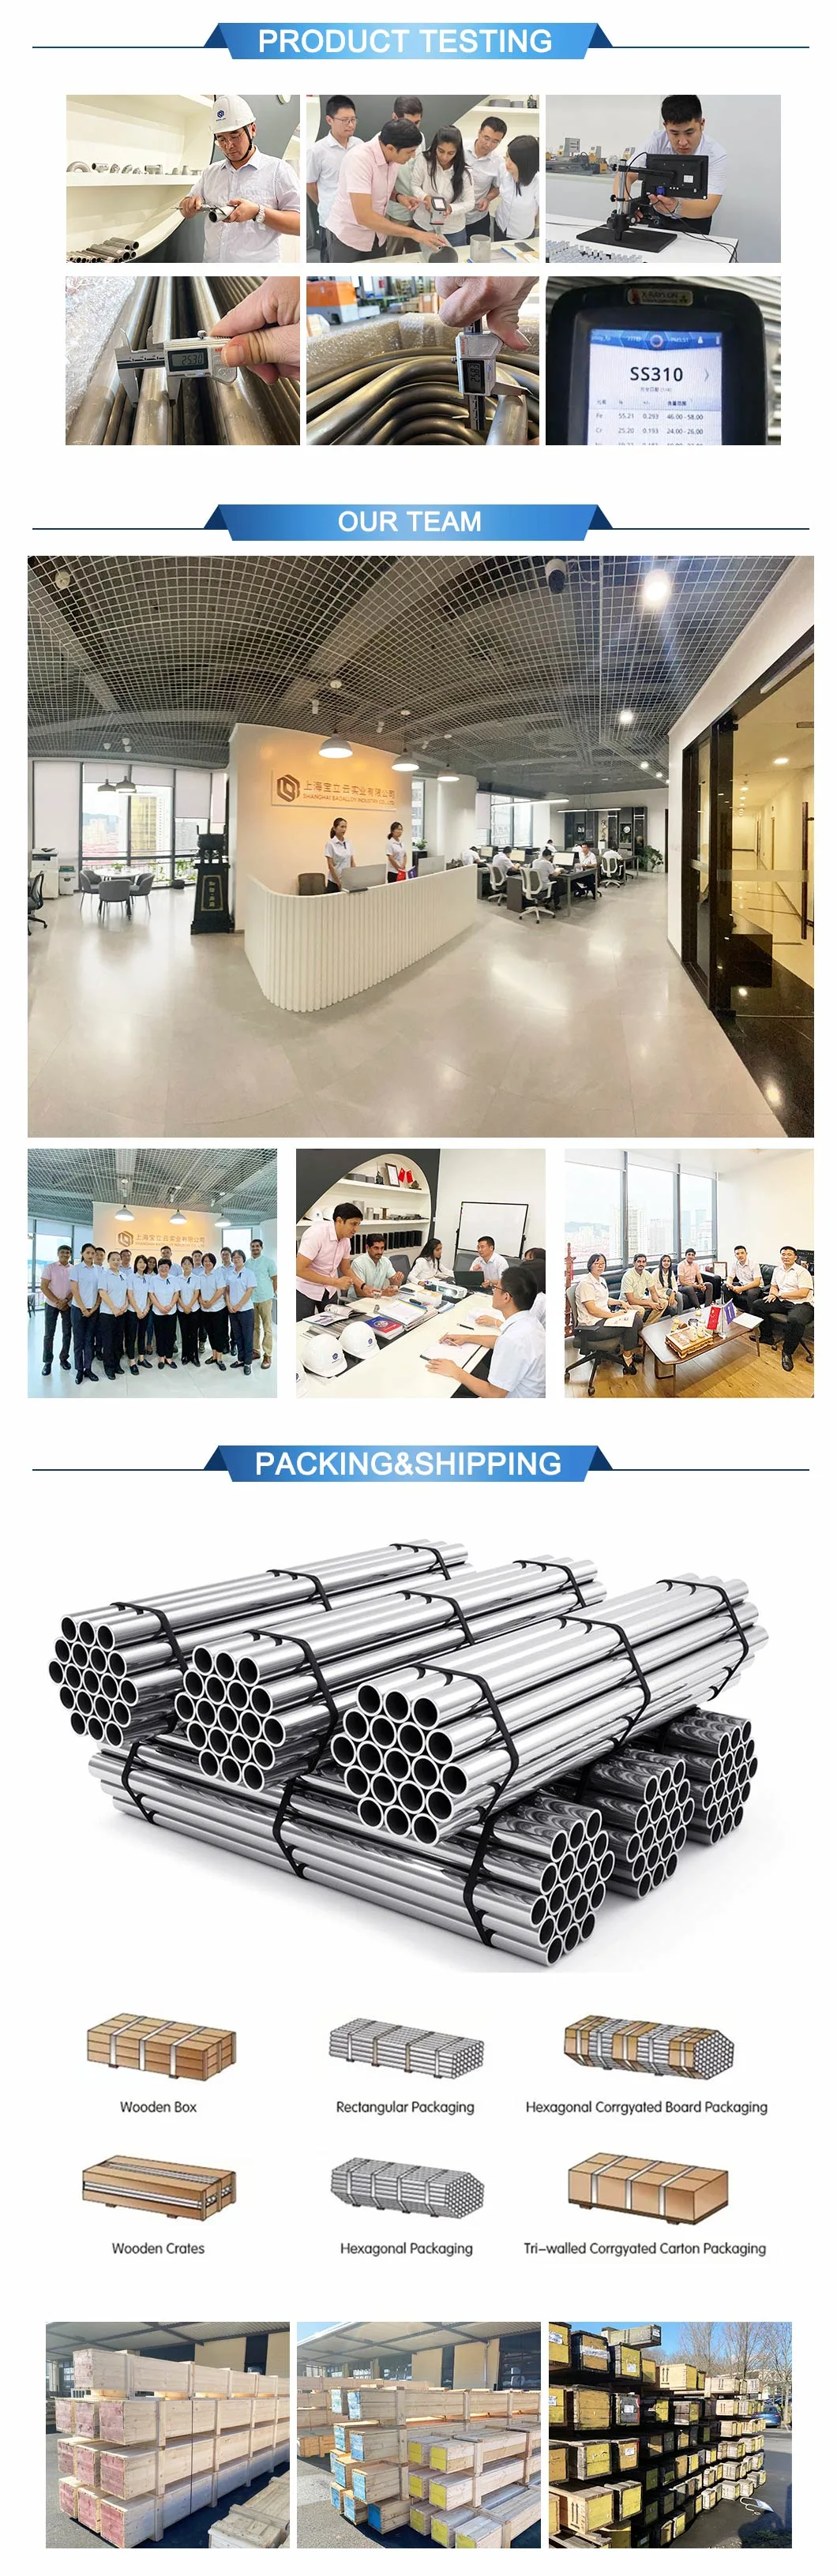 Stainless Steel Welded Tube for Ventilating Kitchen Exhaust Pipe